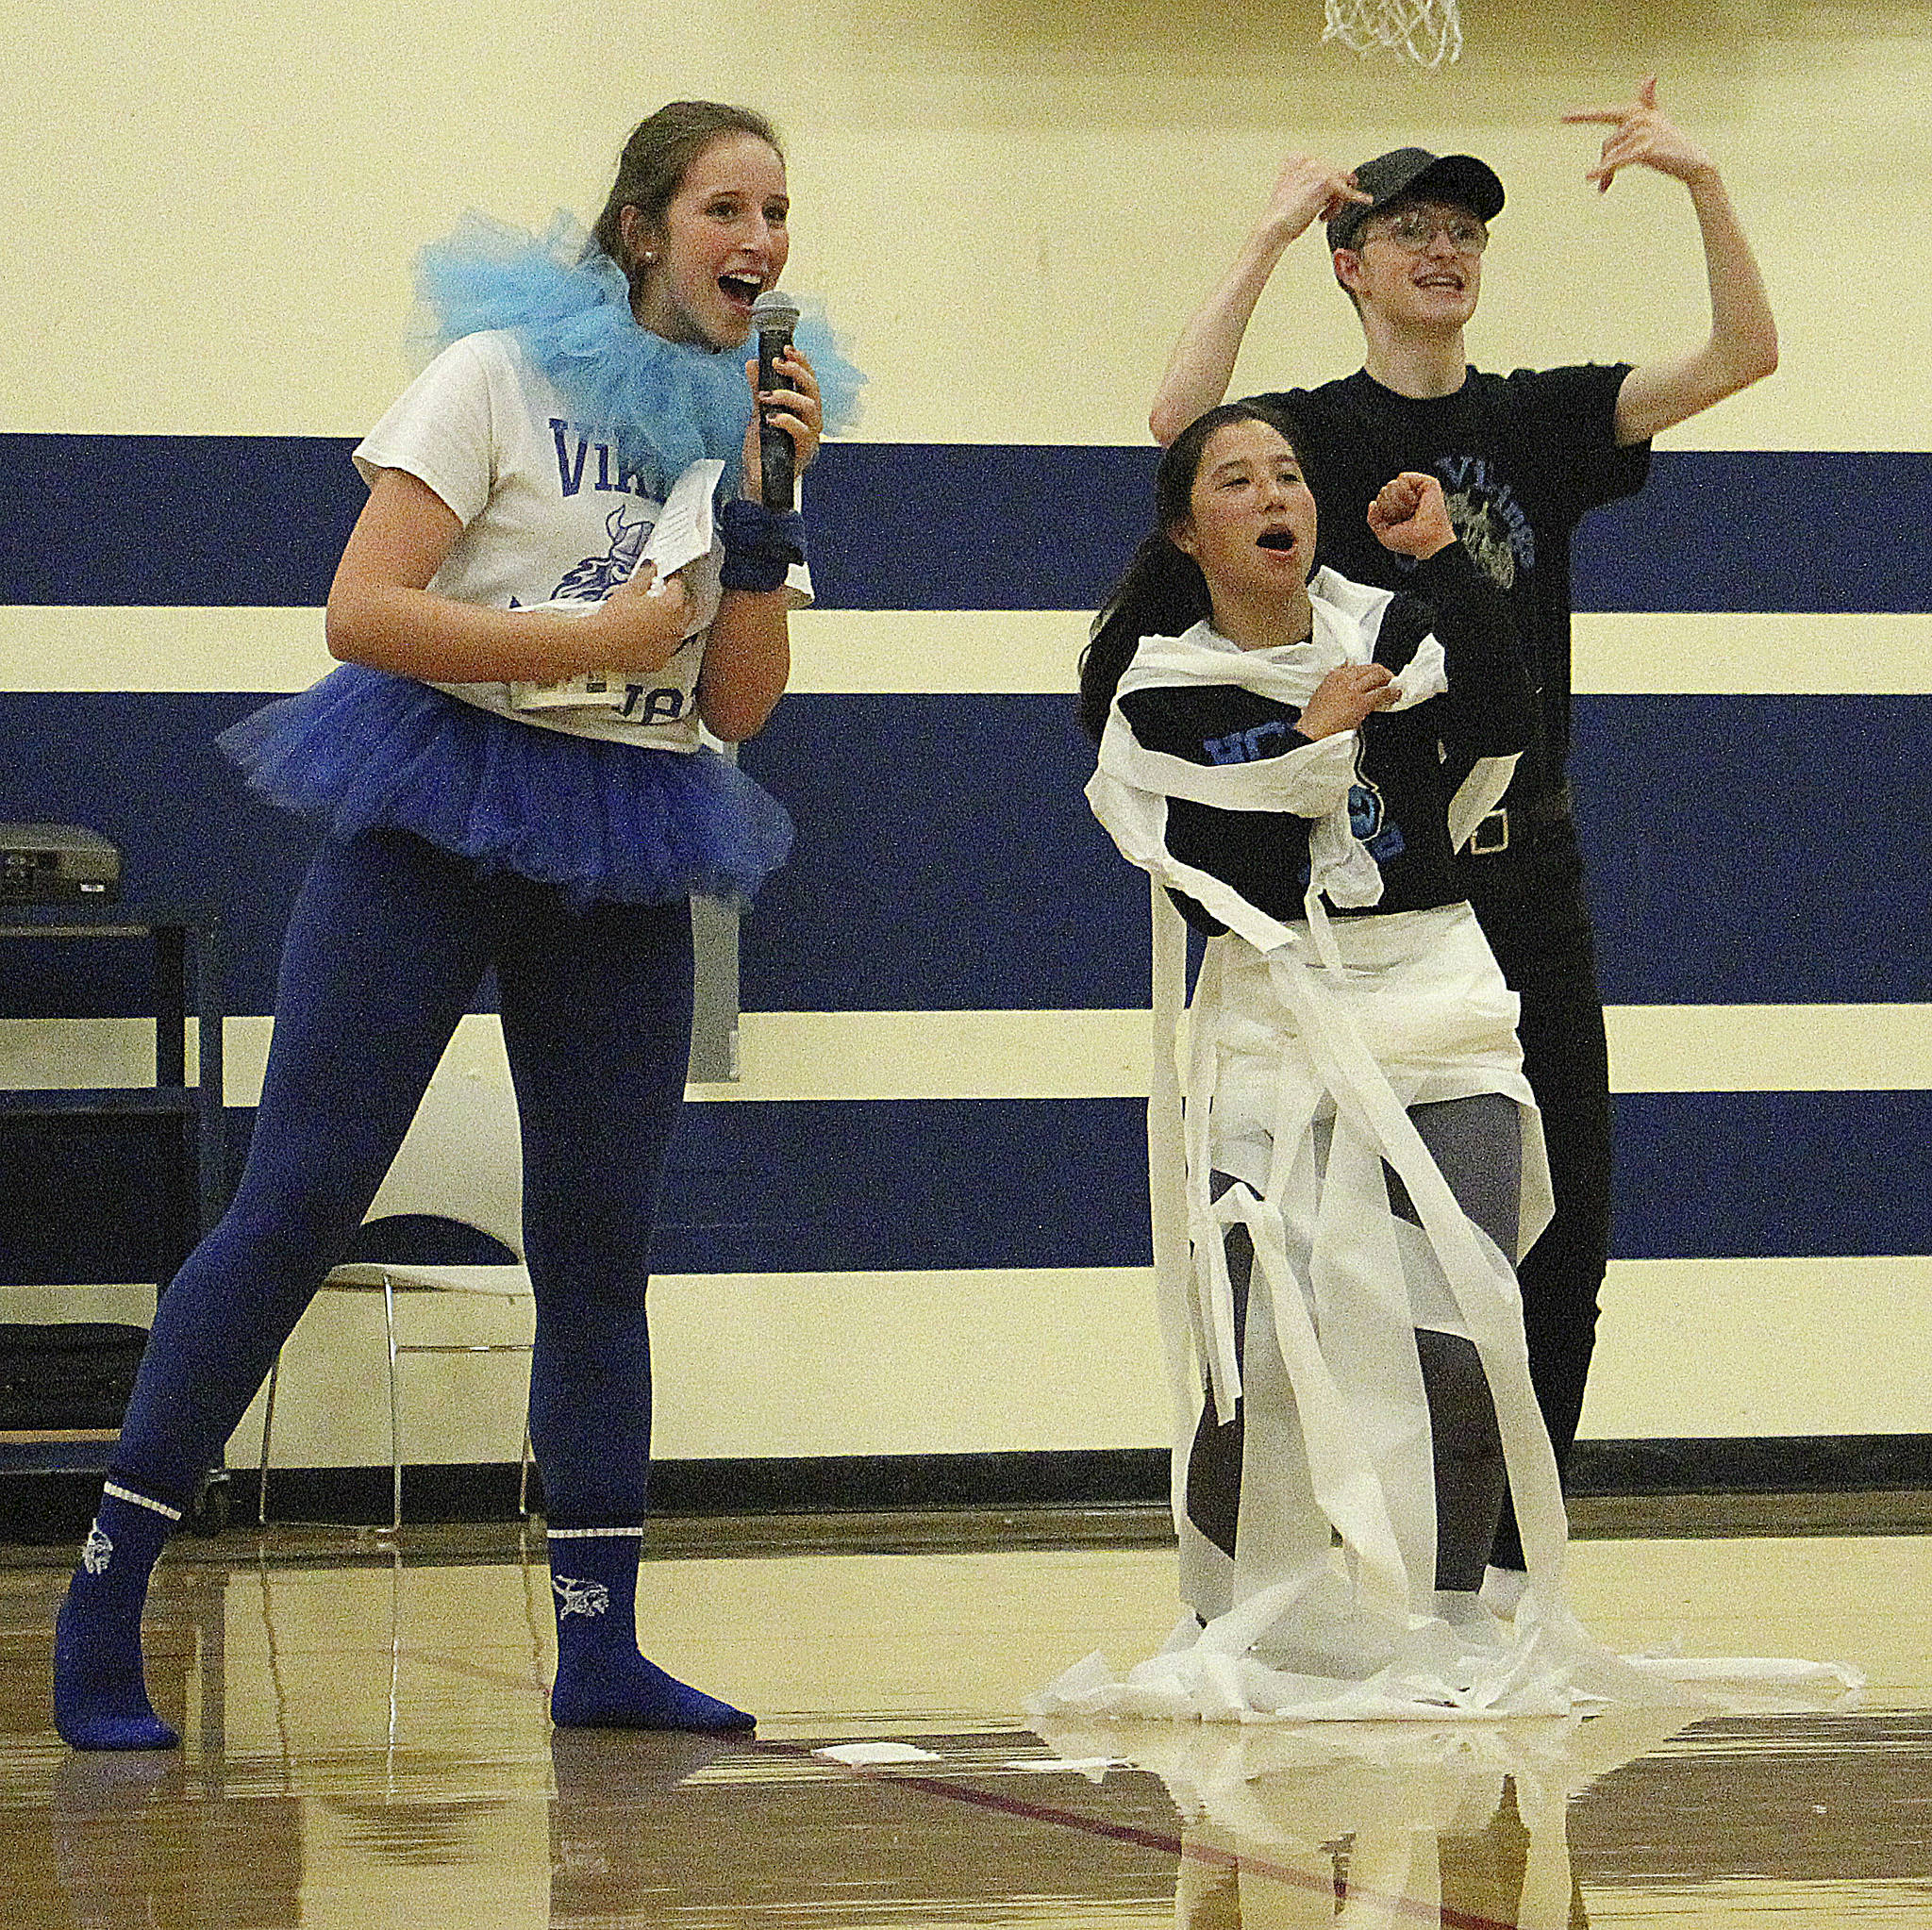 Homecoming assembly and parade photos | Soccer game and barbecue on Saturday